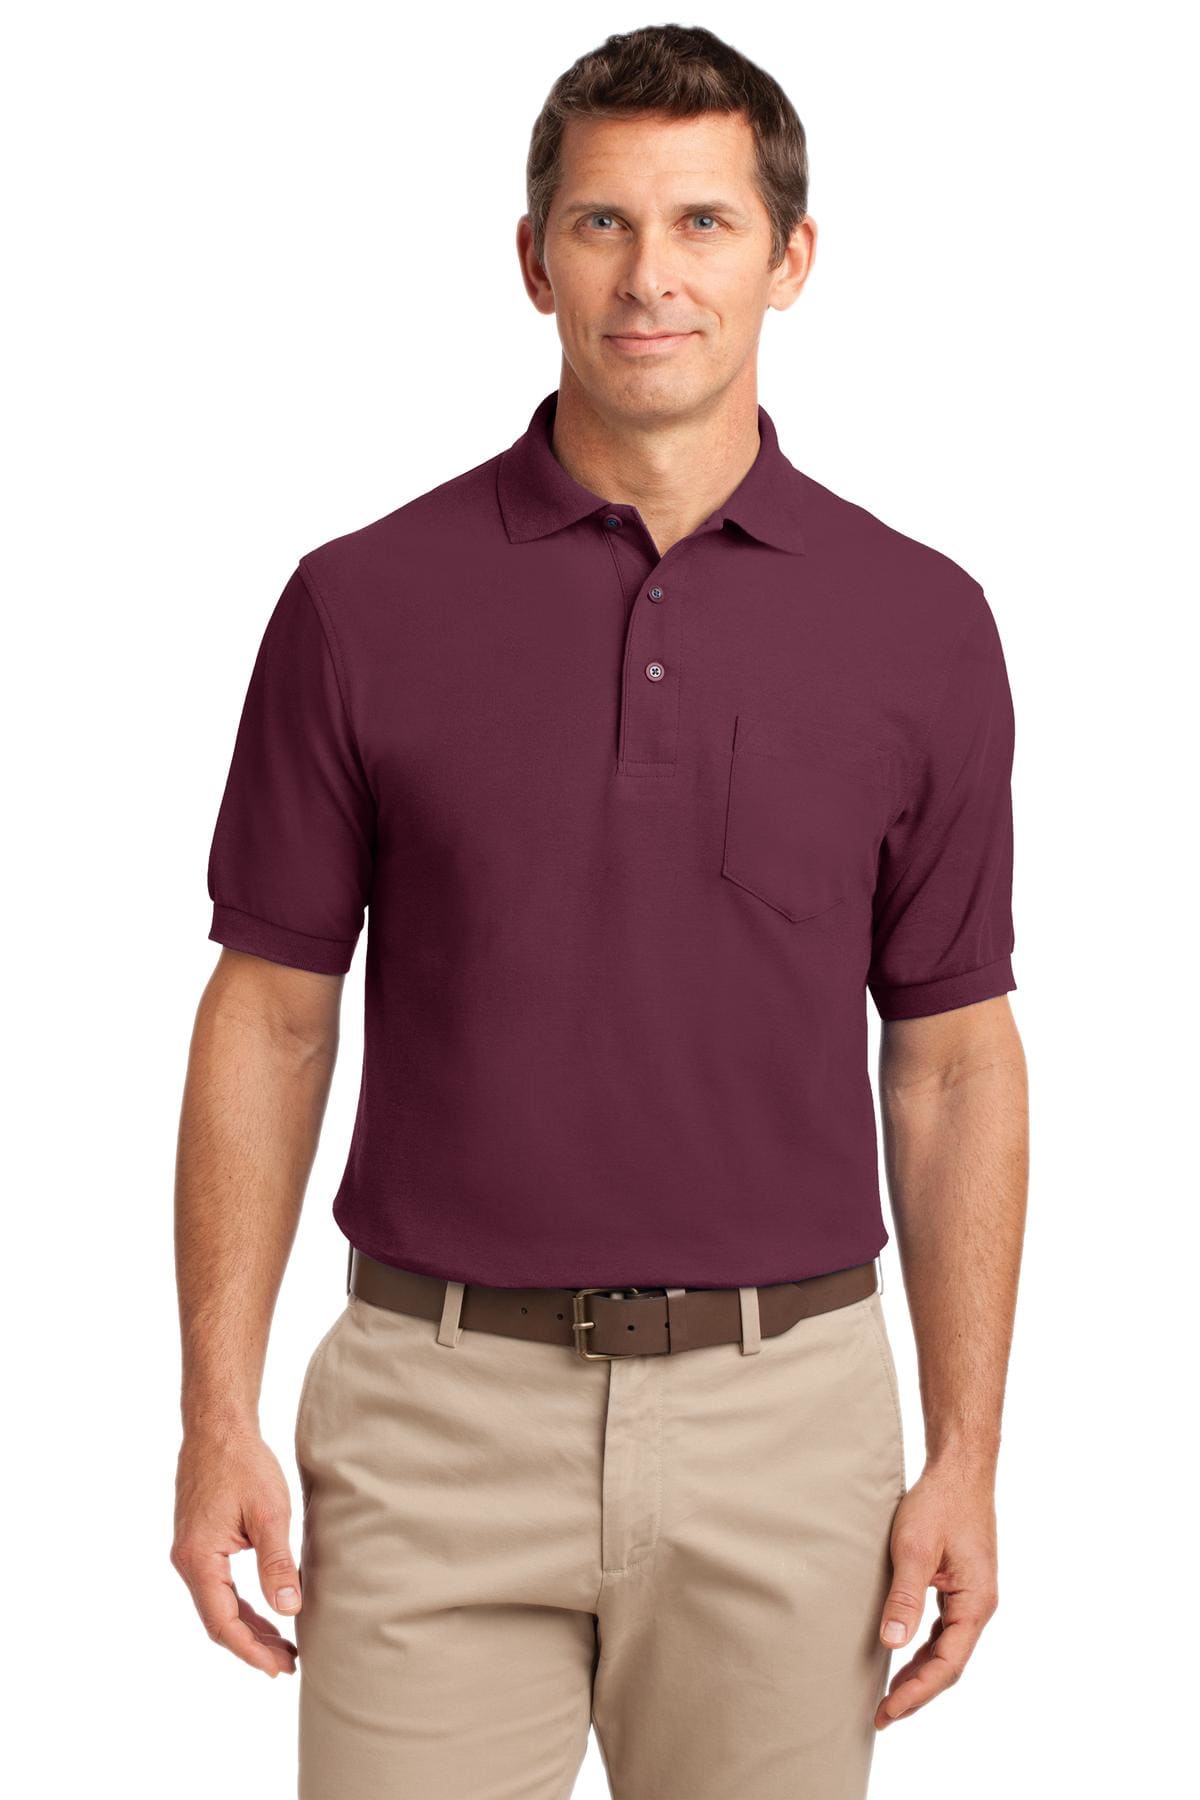 Port Authority Tall Silk Touch’ Polo With Pocket. Tlk500p - Activewear / Shirts